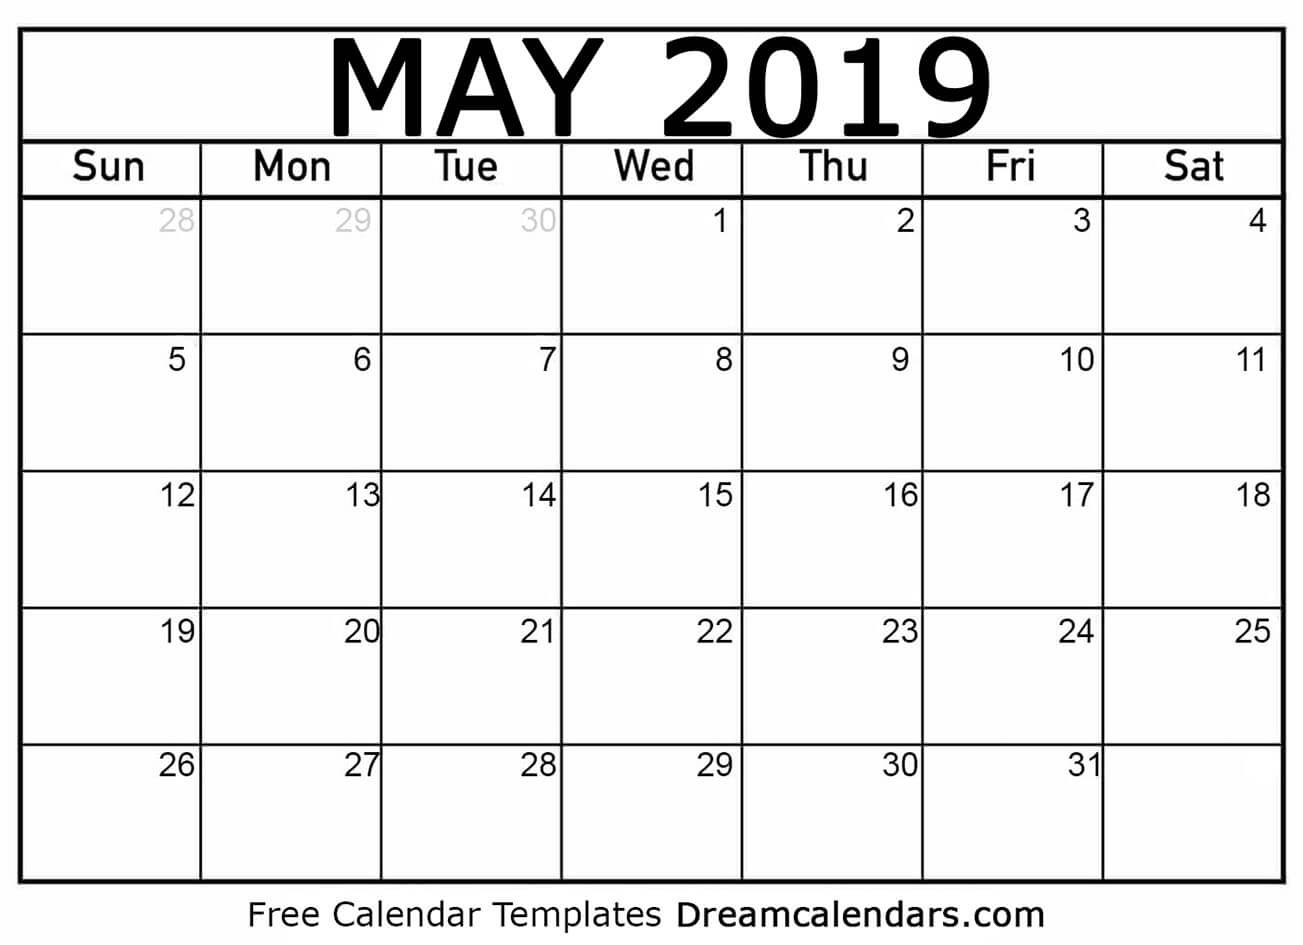 How To A Printed Or Printable Calendar For May 2019